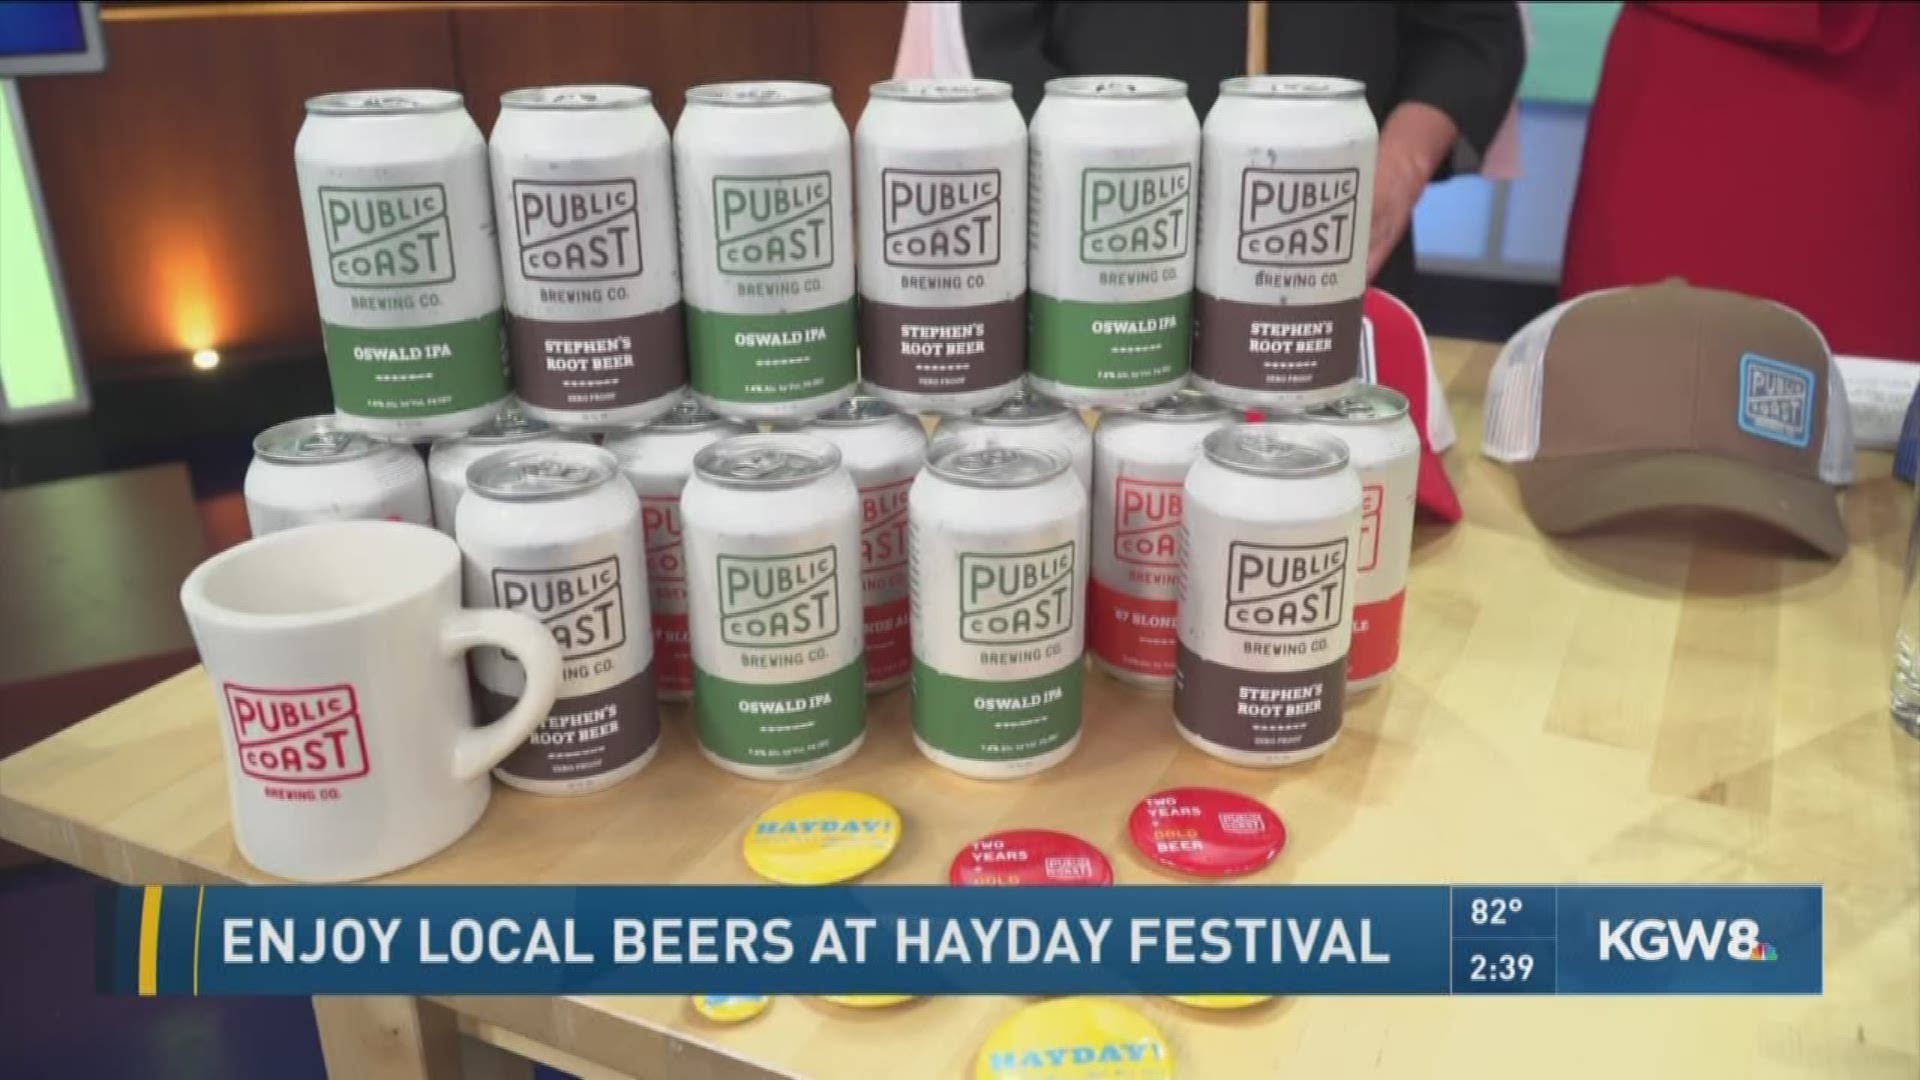 Enjoy local beers at Hayday Festival